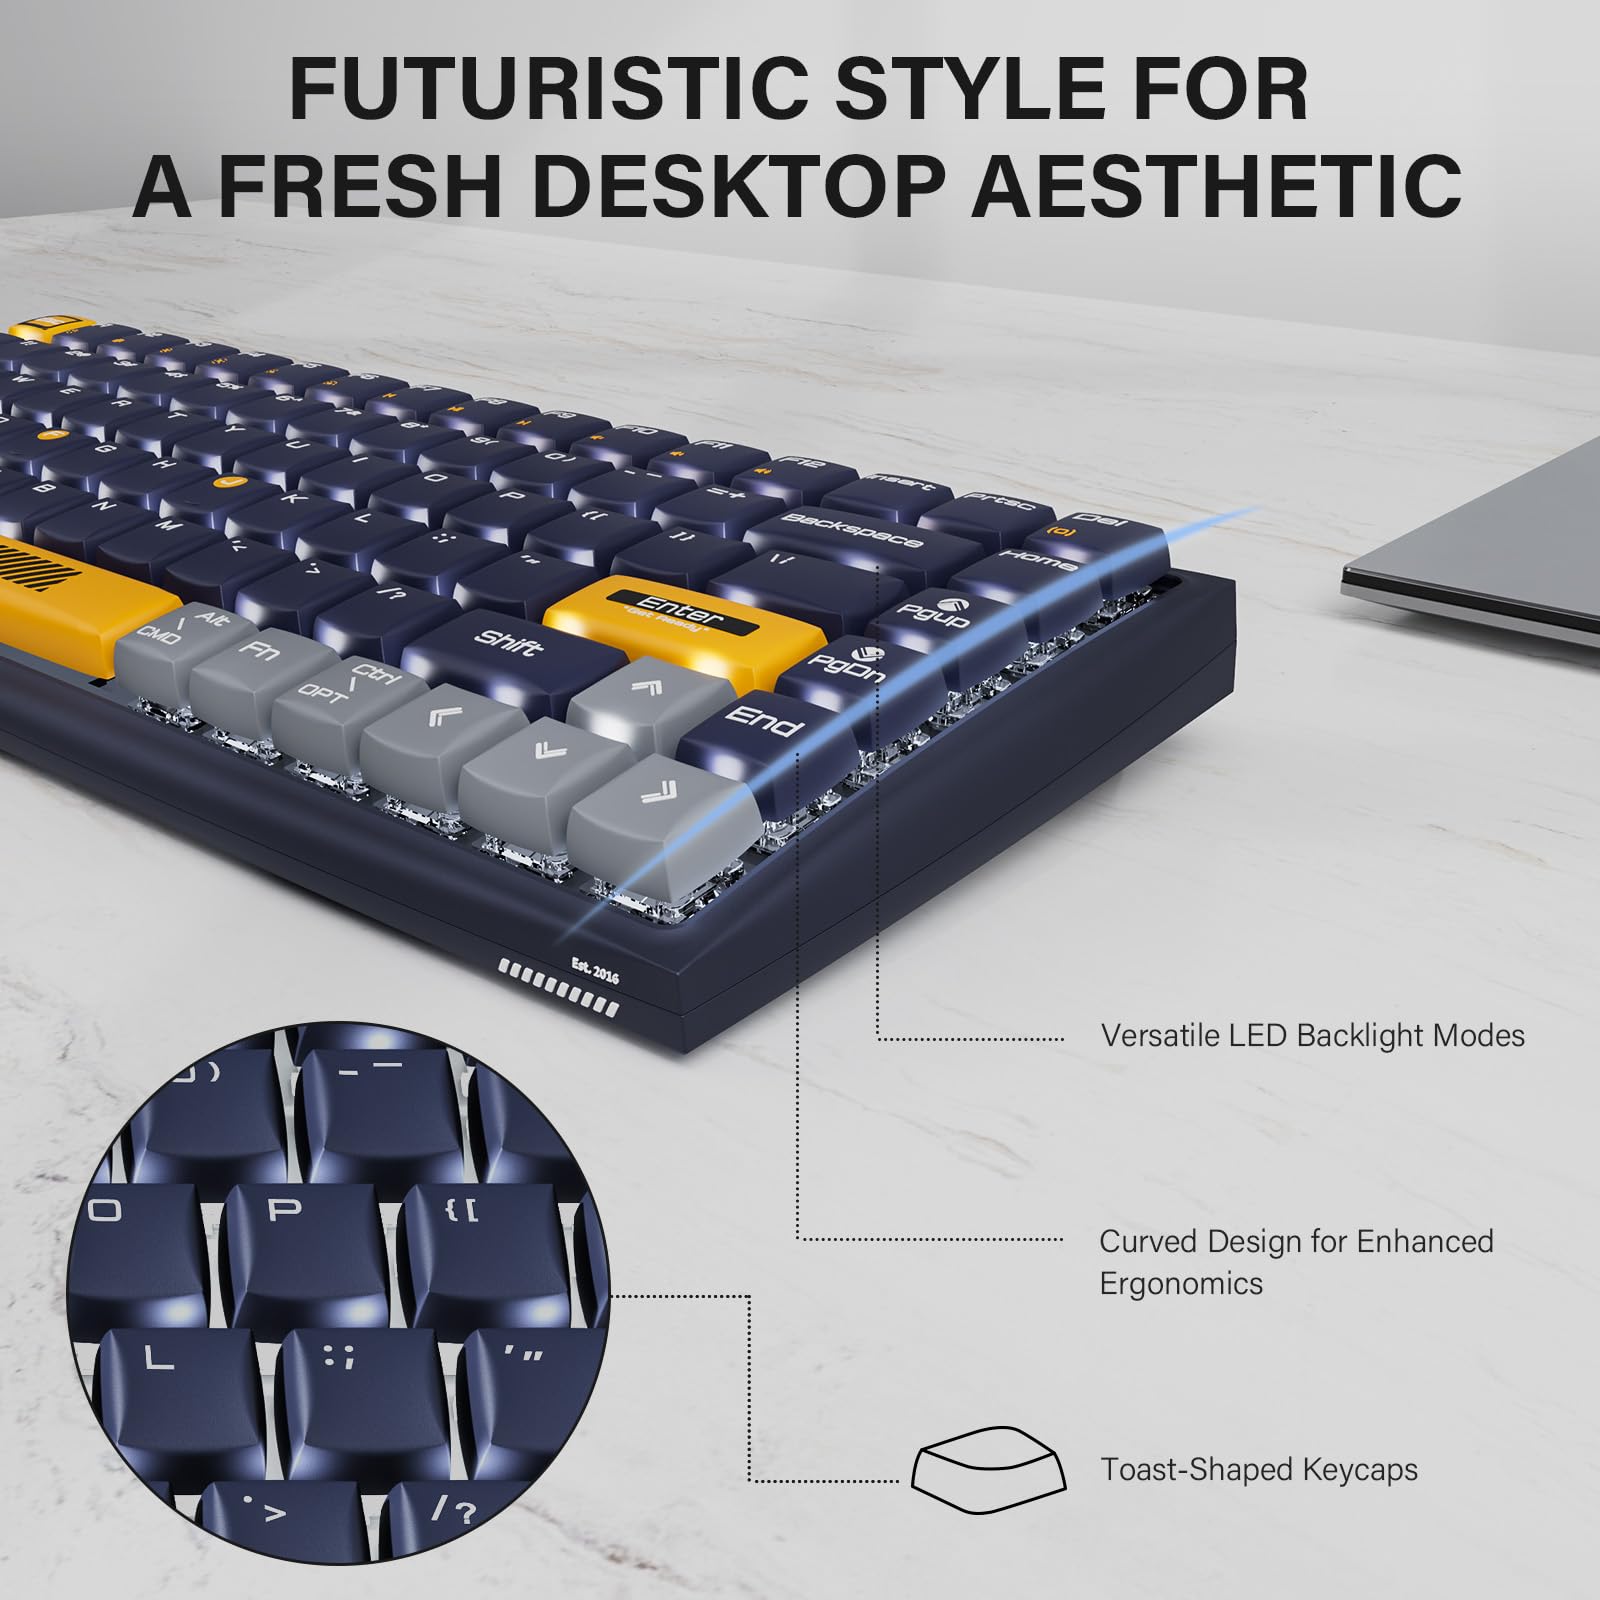 Durgod K710 Wireless Mechanical Keyboard, 84-Key 75% Layout, Connect up to 3 Devices via Bluetooth/2.4G Wireless for Mac Windows Linux, LED Backlit & N-Key Rollover, Tactile Brown Switch, Navy Blue